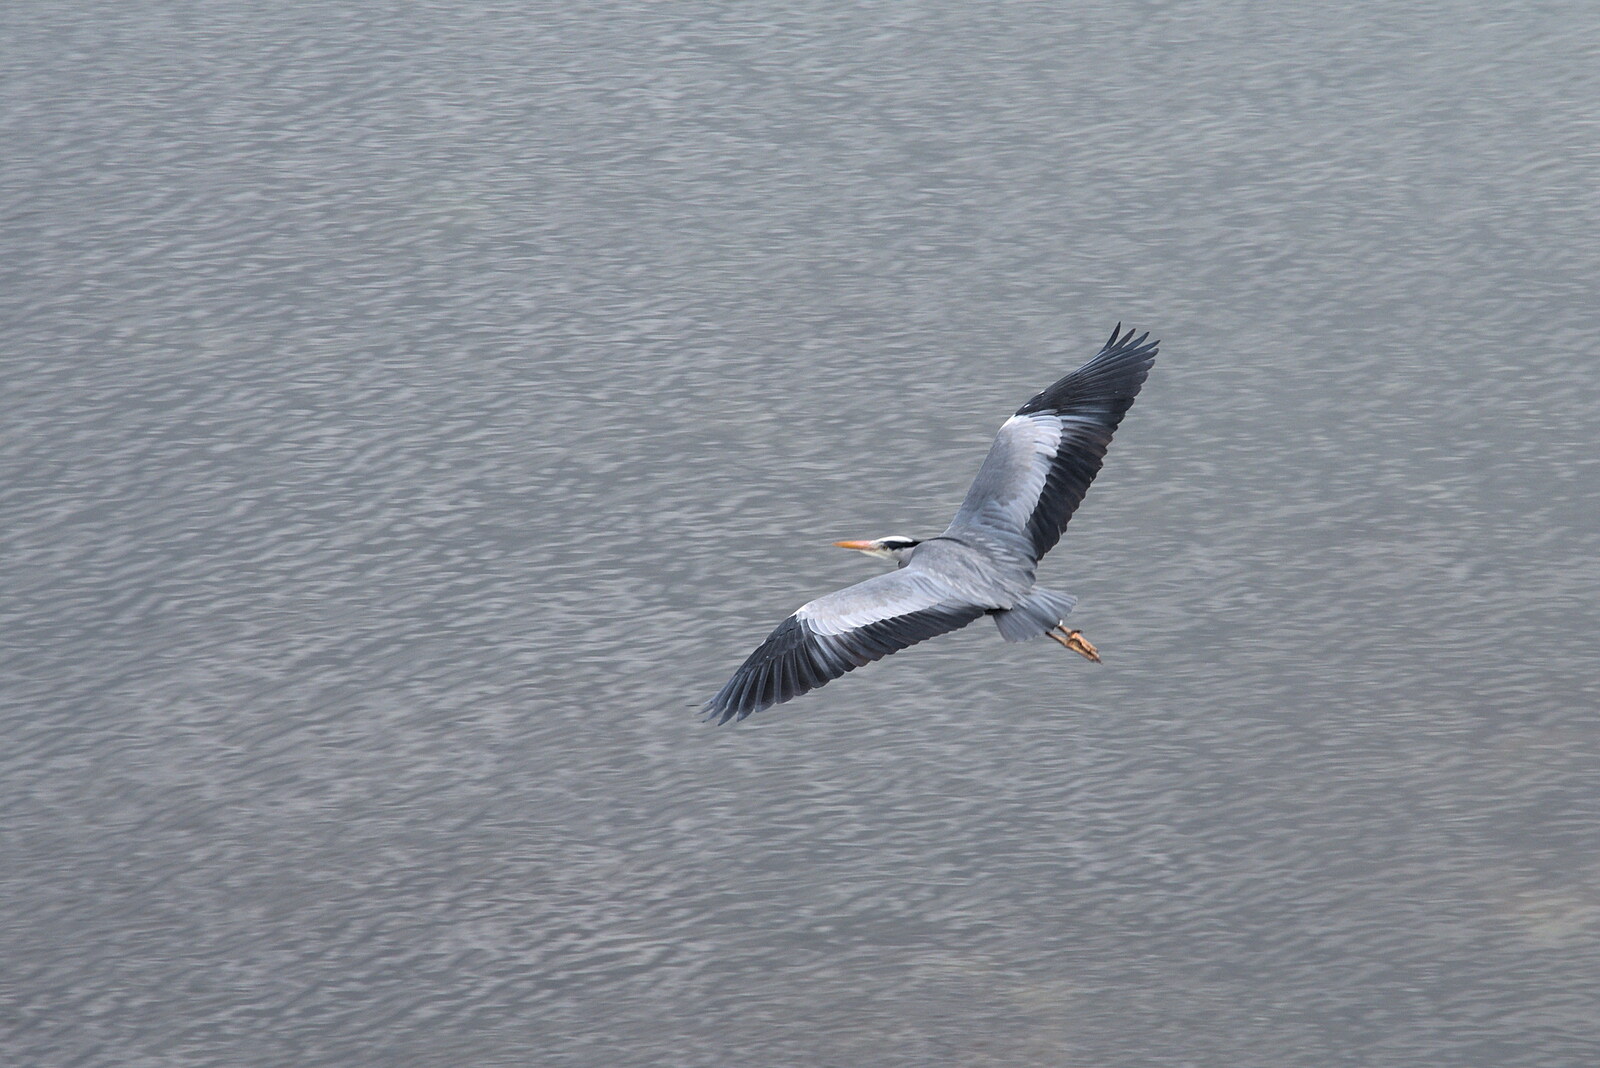 The End of the Breffni, Blackrock, Dublin - 18th February 2023: The heron takes flight over the sea